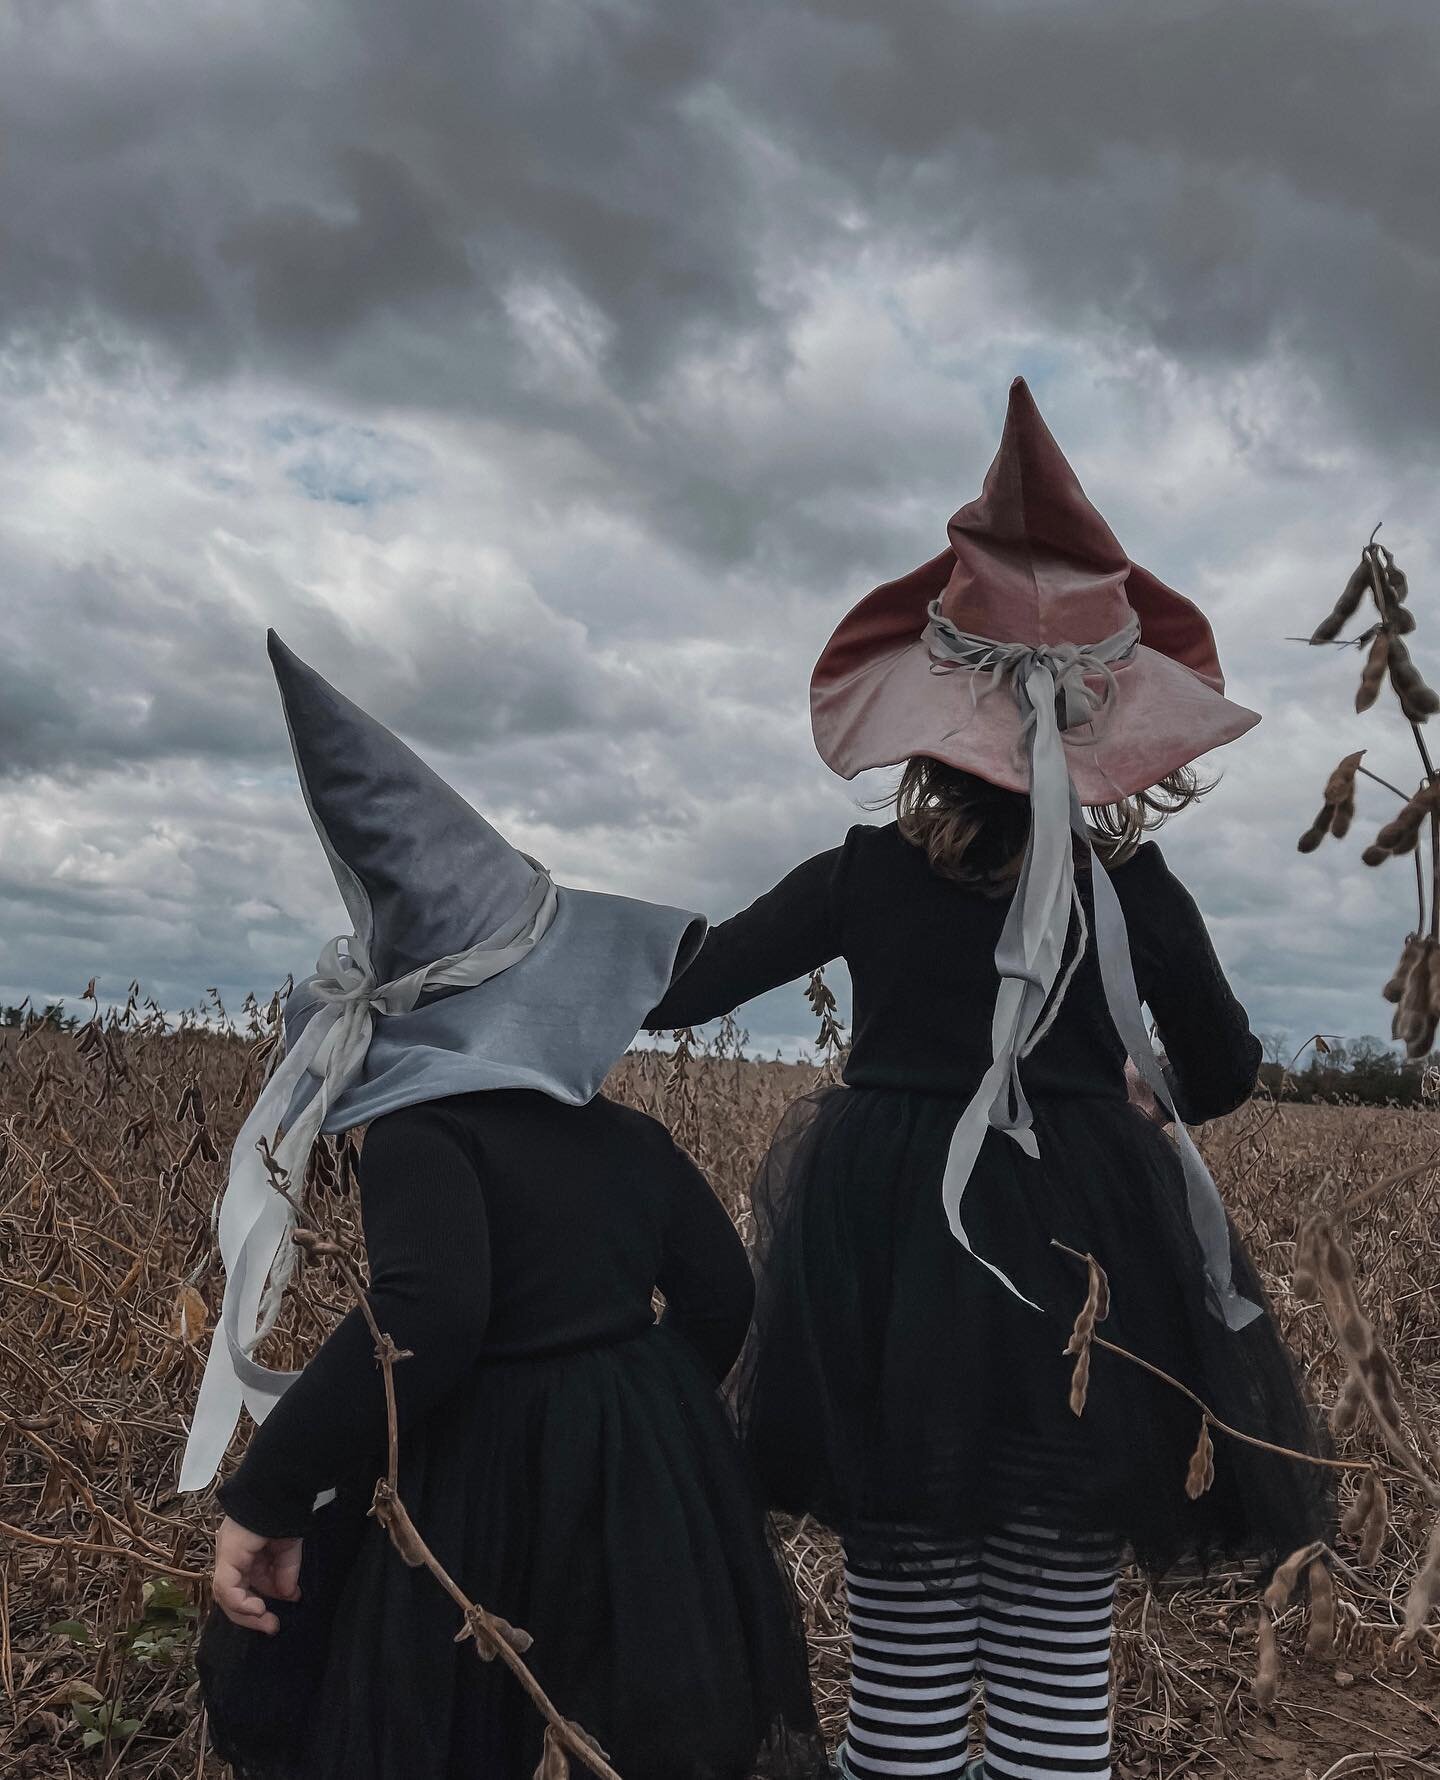 🕸Happy Halloween from the witch sisters🕸 #lukesisters #witchsisters #alukepaperie #halloweencostume #halloween2021🎃